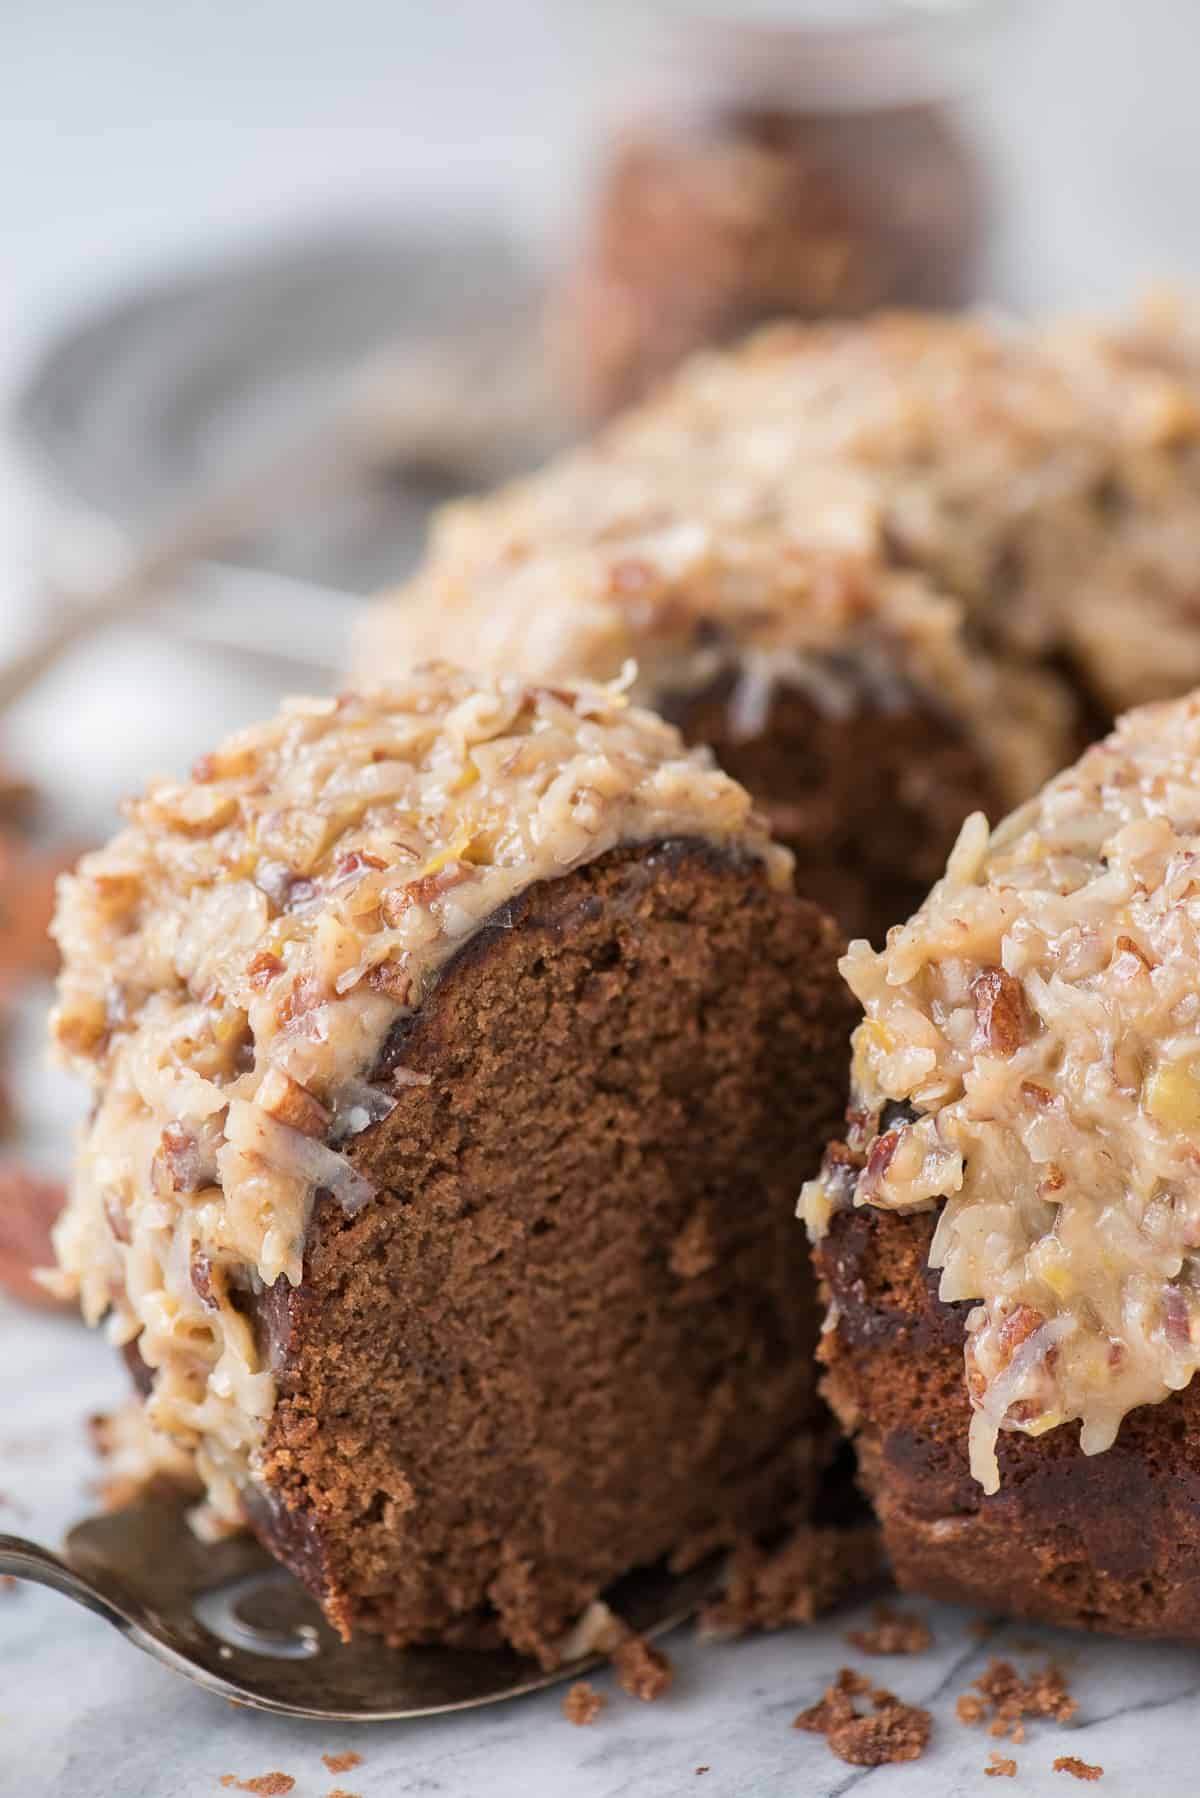 Rich and chocolatey german chocolate bundt cake with classic german chocolate frosting! We’ll show you how to make that classic coconut pecan frosting!